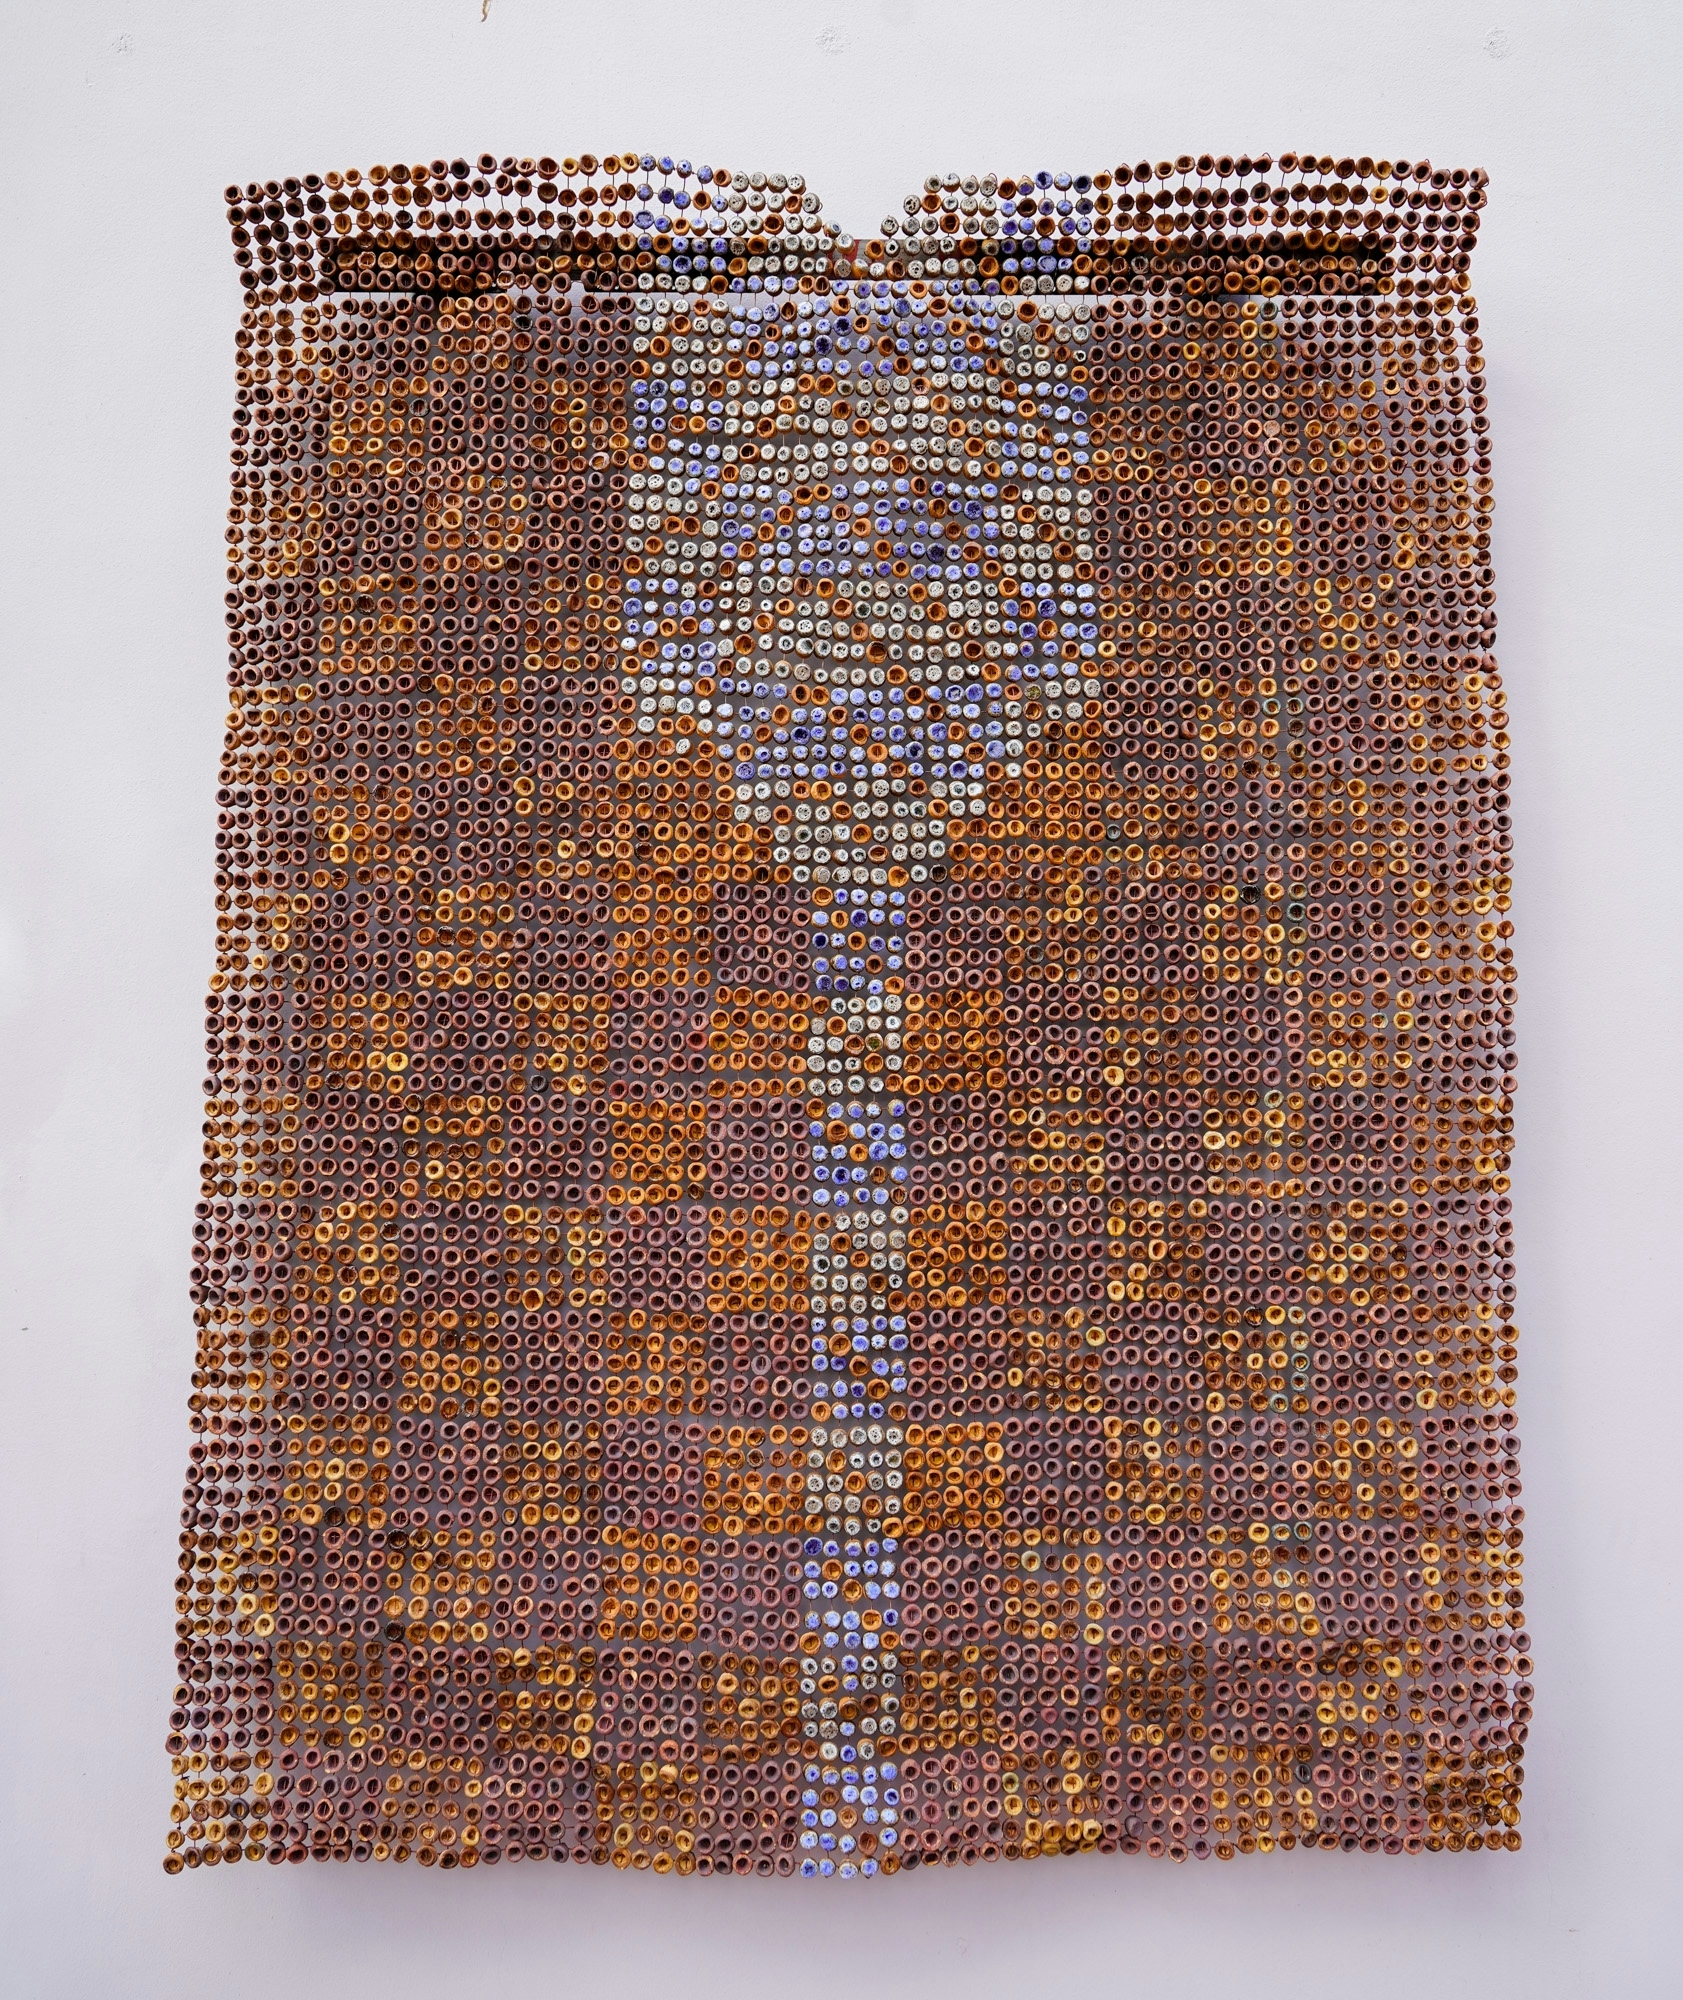 Danshiki with Y-Shaped Embroidery